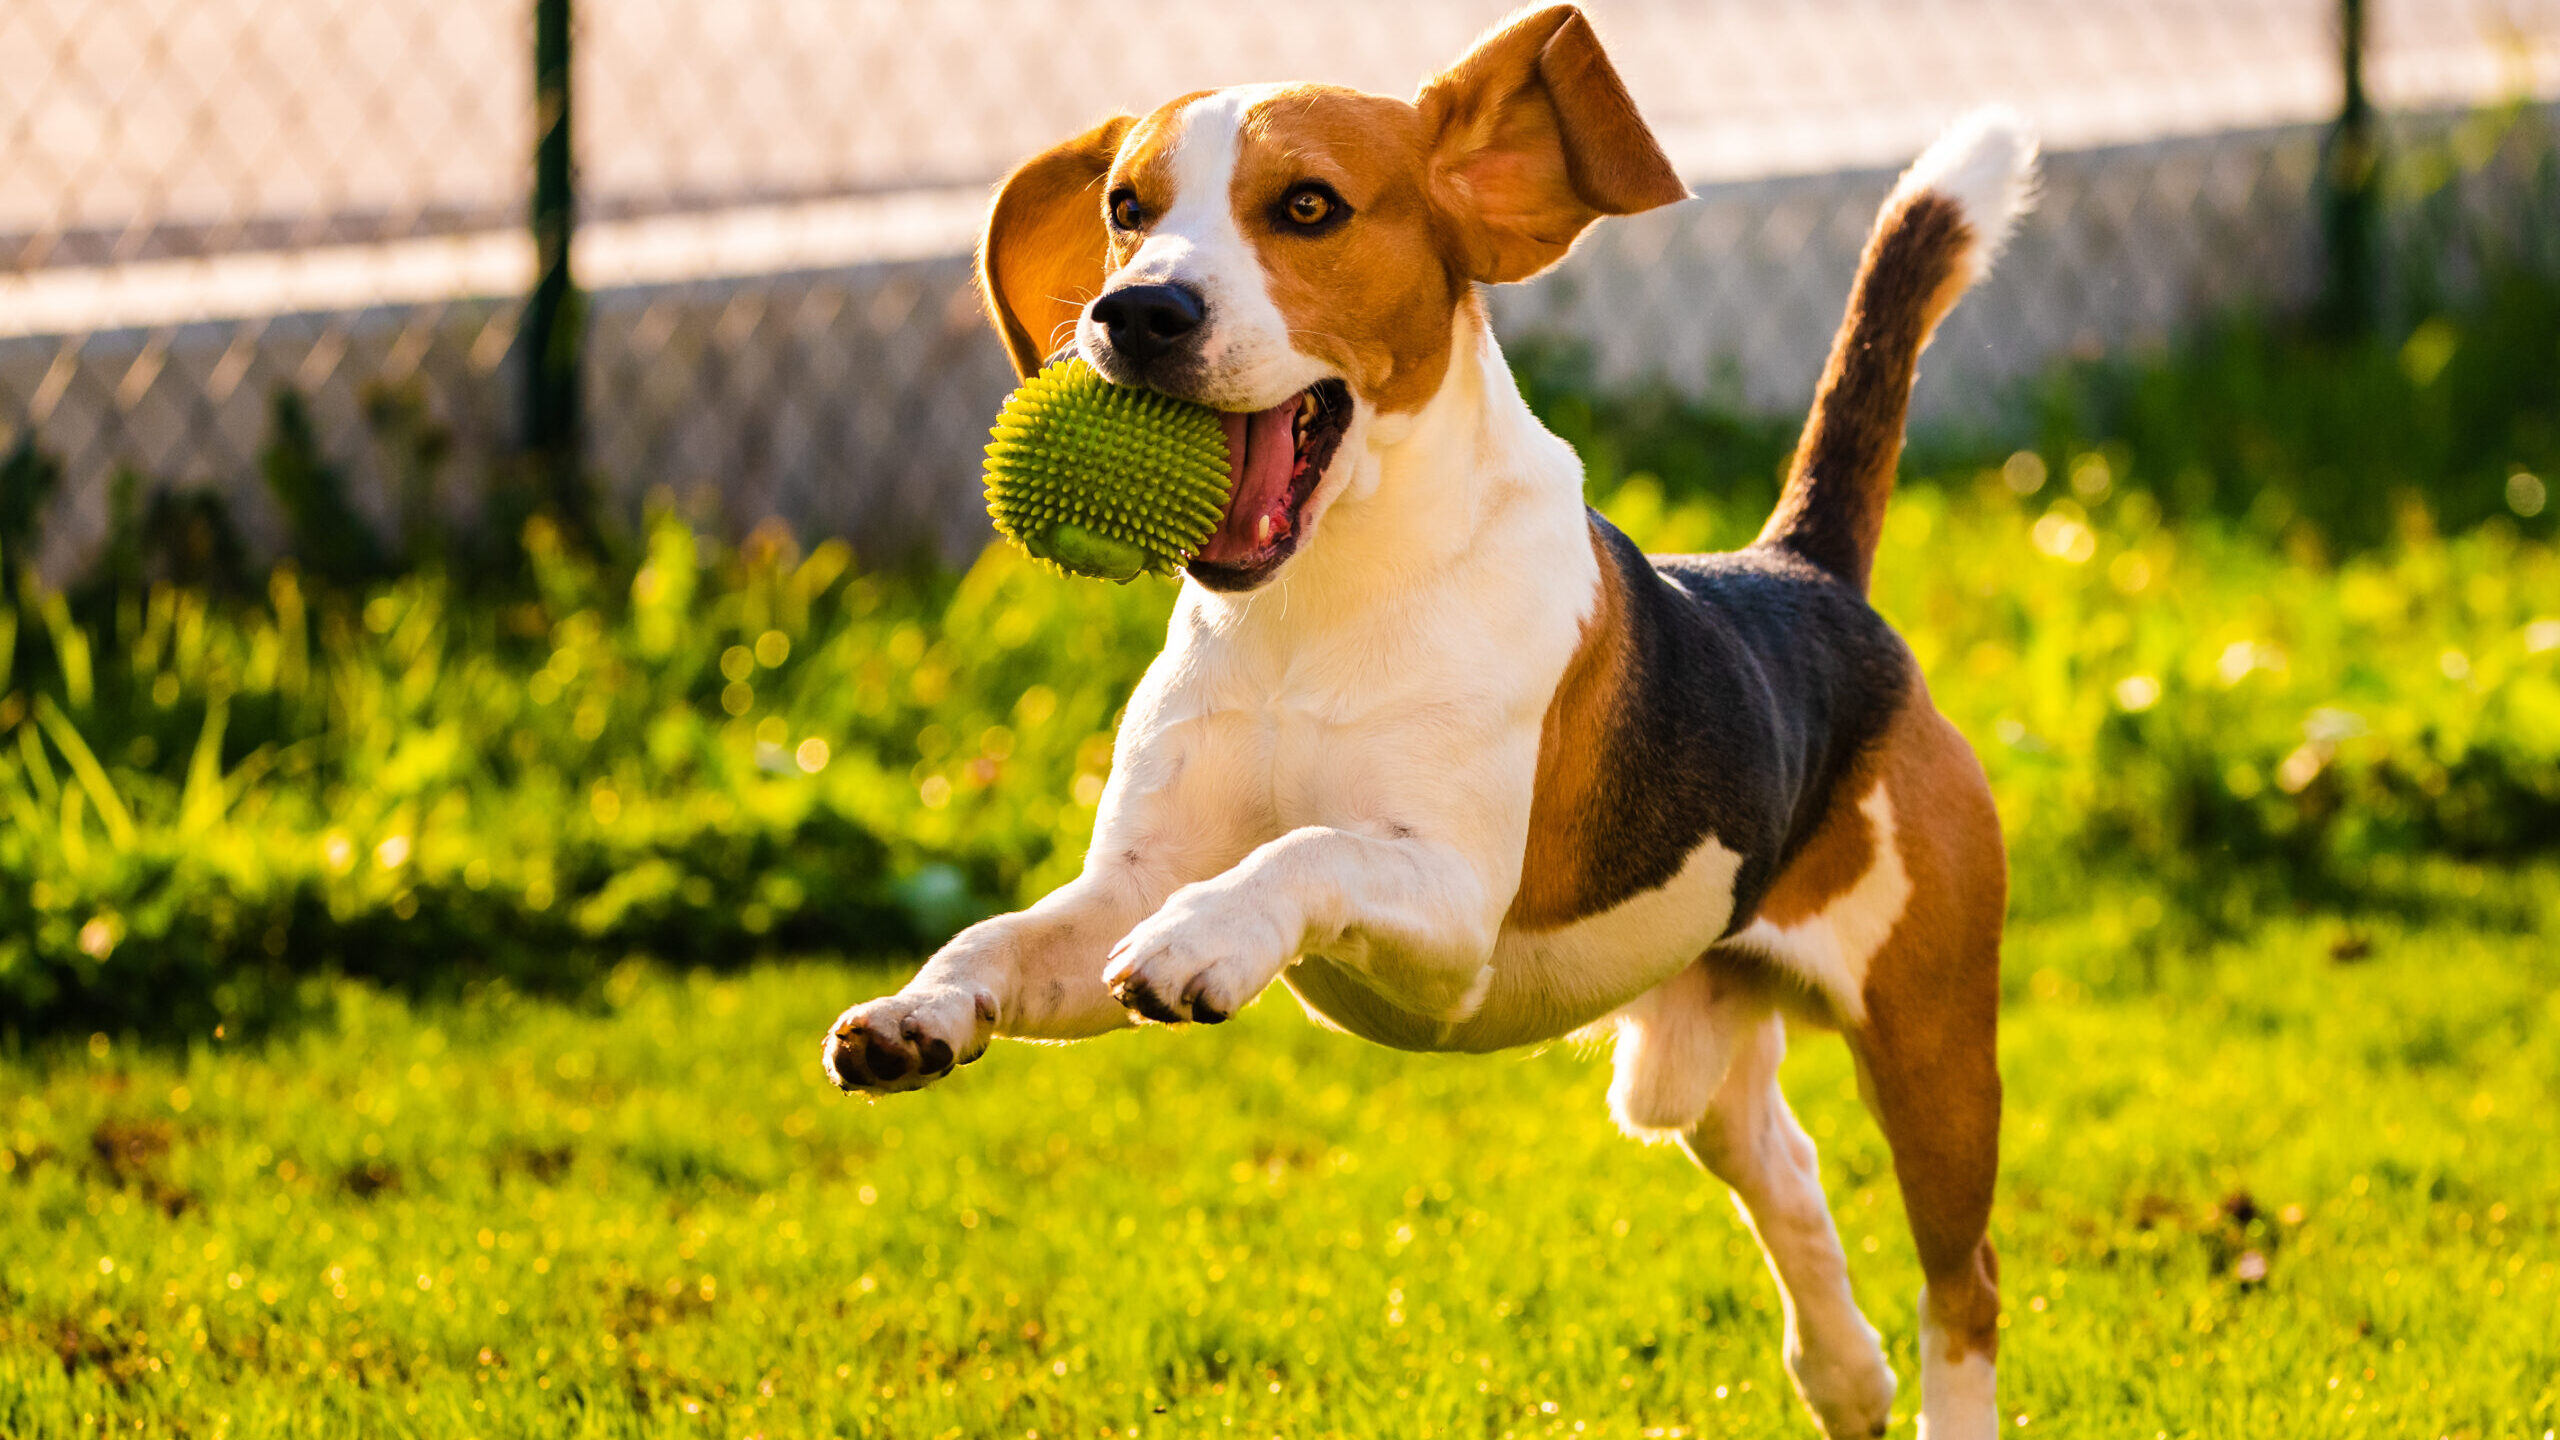 Beagle dog jumping and running with a toy in a outdoor towards the camera